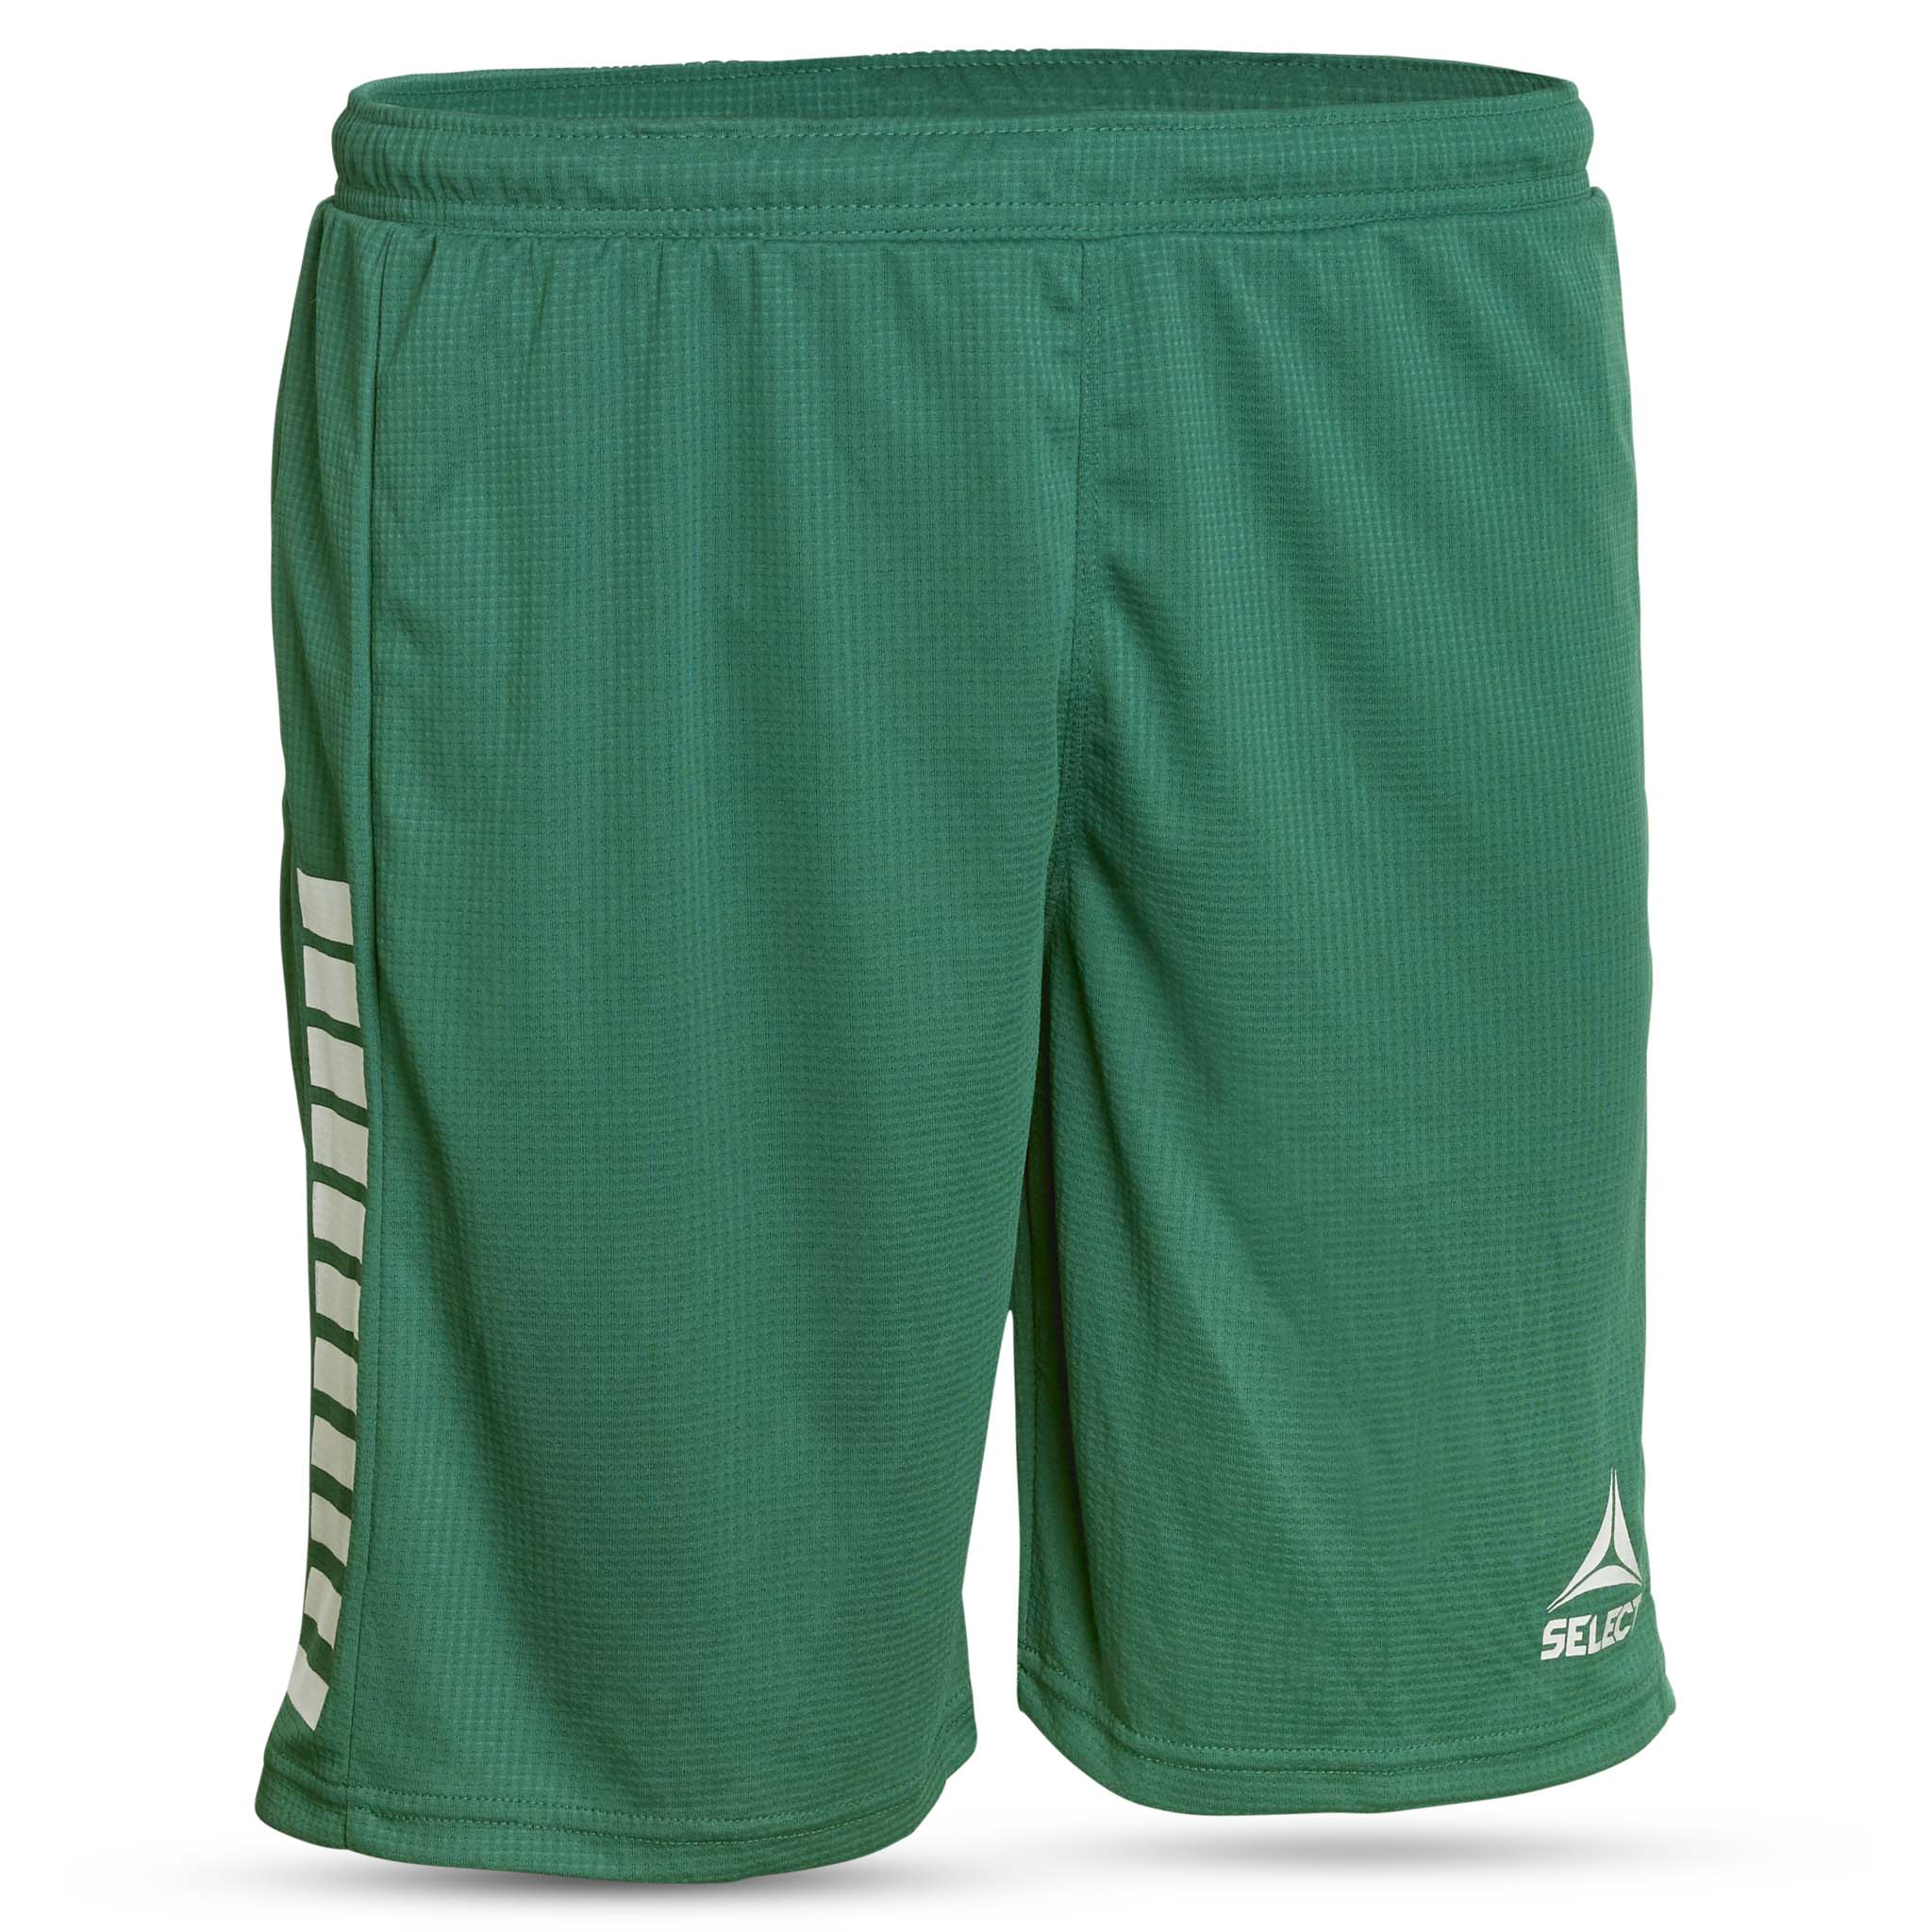 Player shorts - Monaco, youth #colour_green